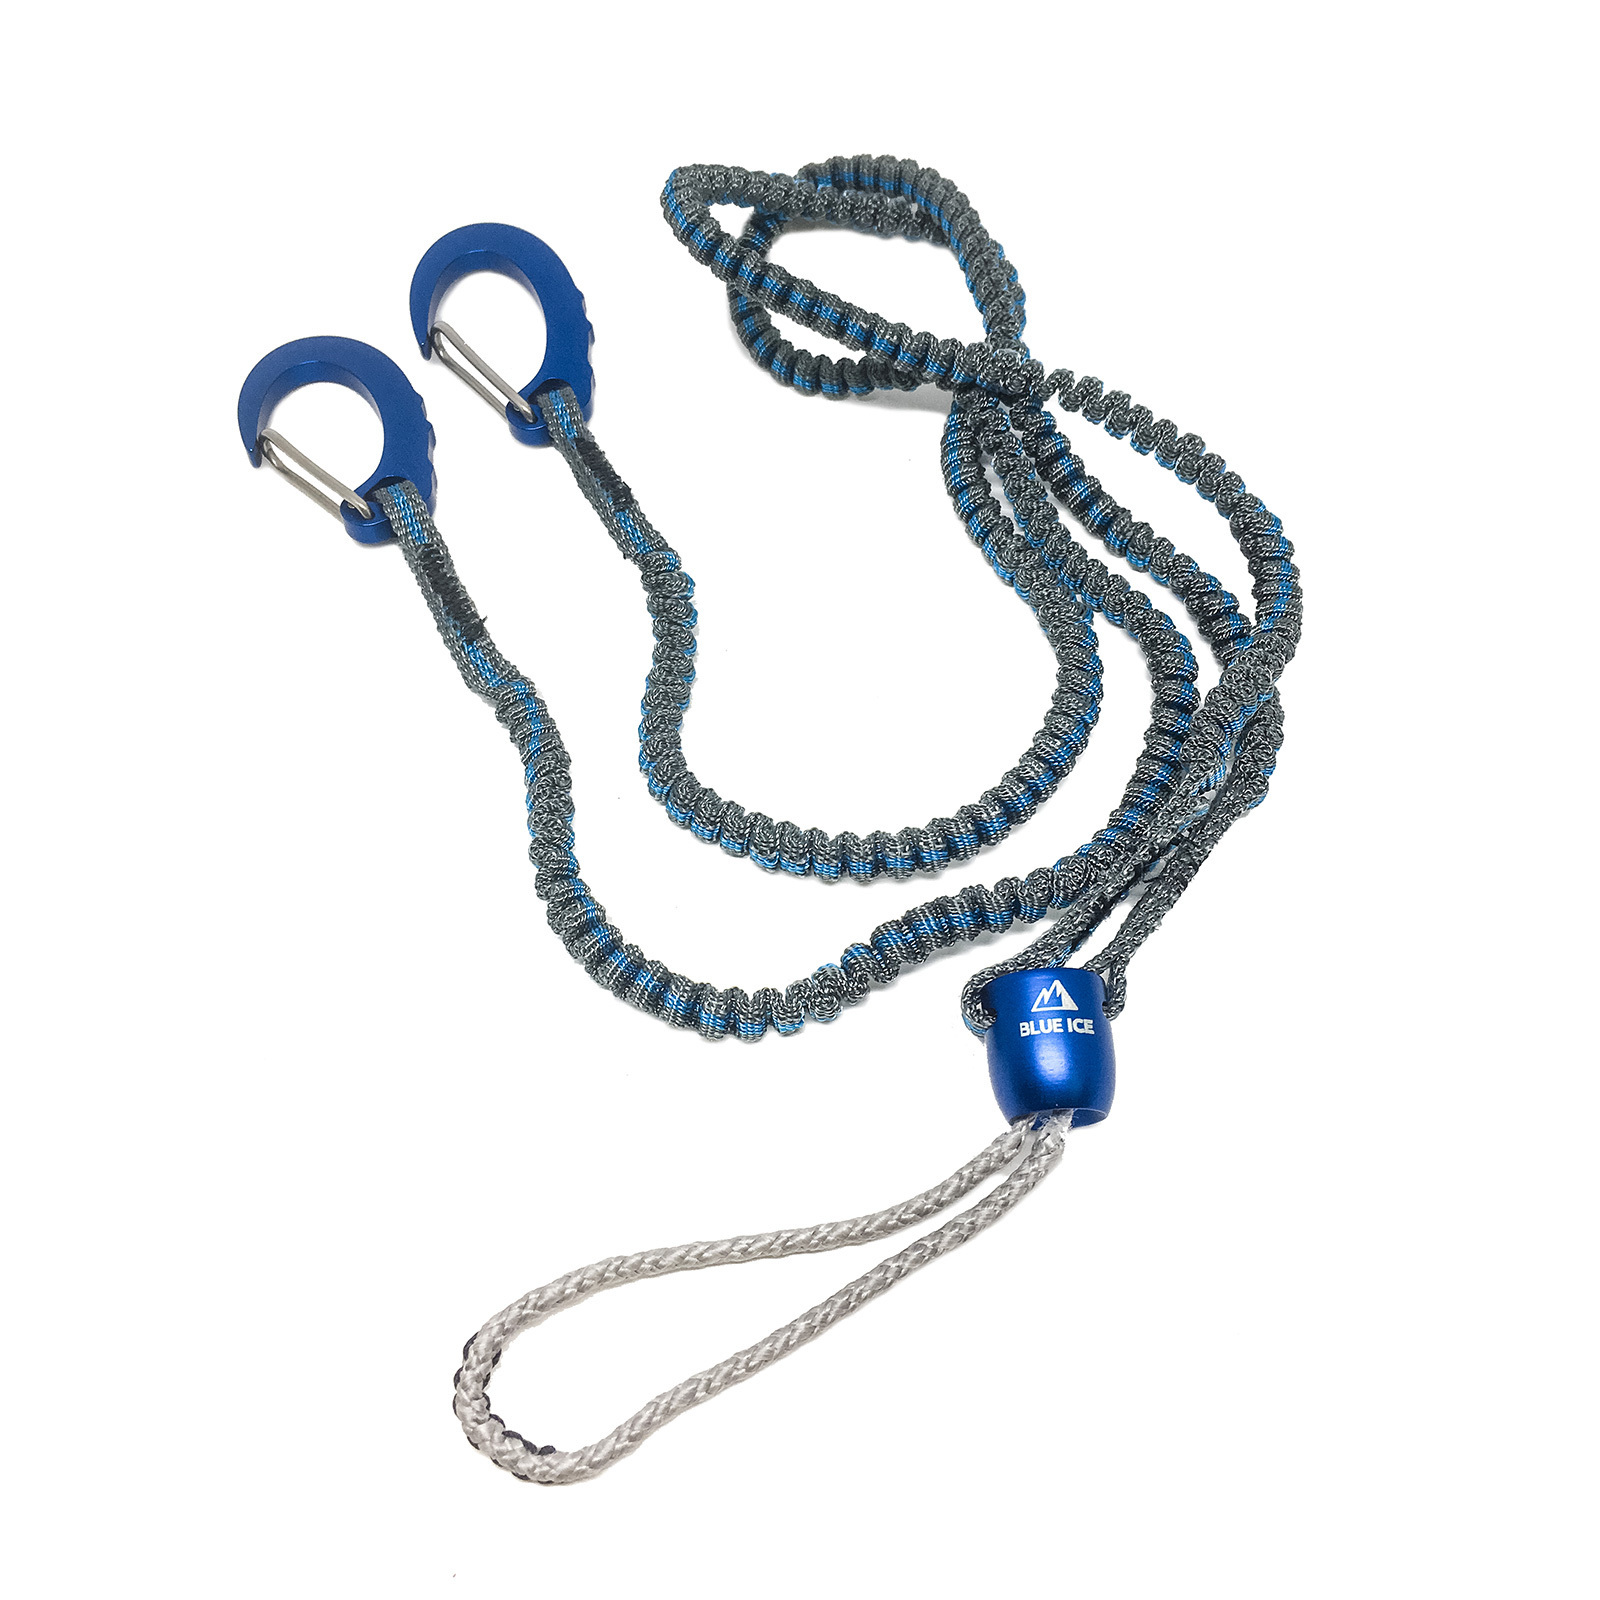 Mountaineering, Climbing and Skimo Accessories - BLUE ICE – Blue